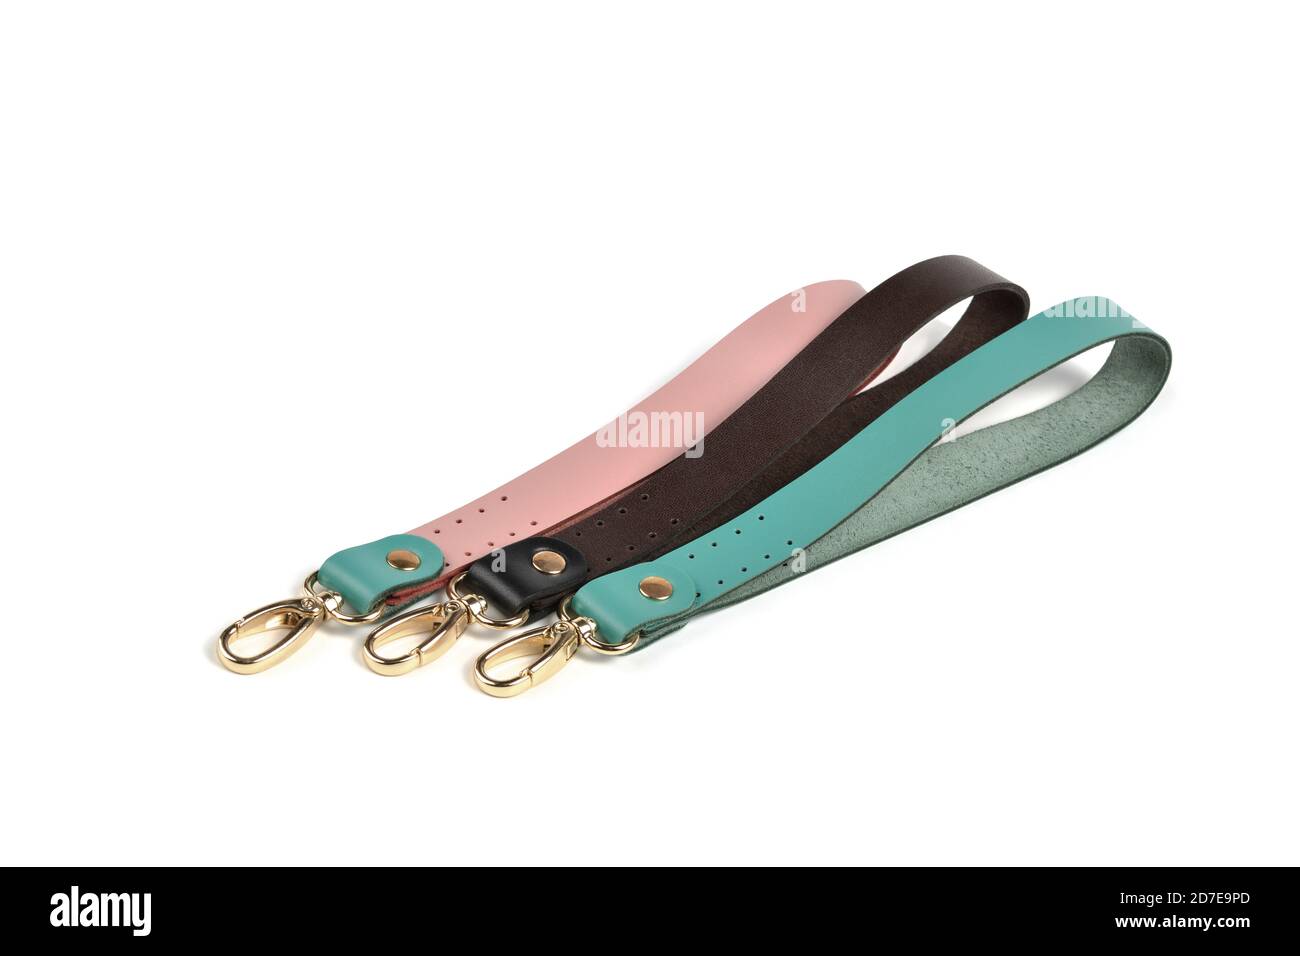 Blank loop pink green brown gray color leather key chain collection on isolated white background with clipping path. Pile set of metallic souvenir. Stock Photo